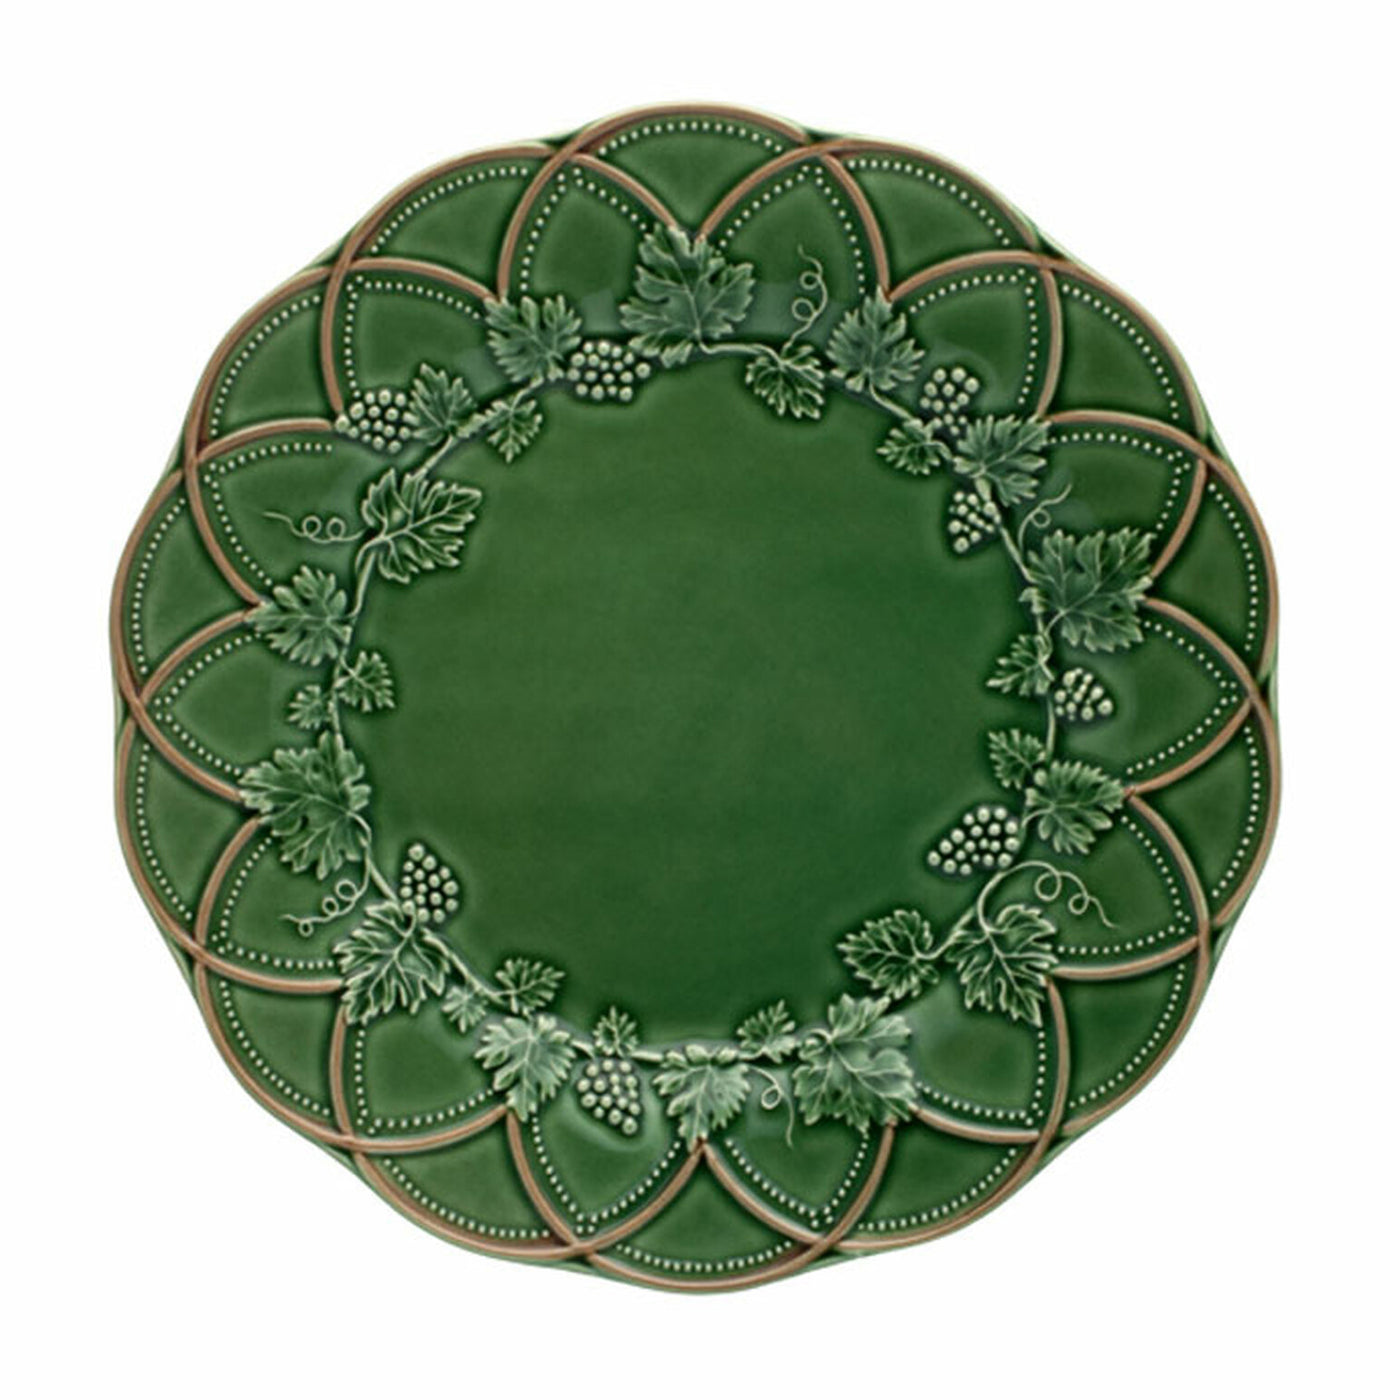 Bordallo Charger Plate-Lifestyle-Green/Brown-Kevin's Fine Outdoor Gear & Apparel